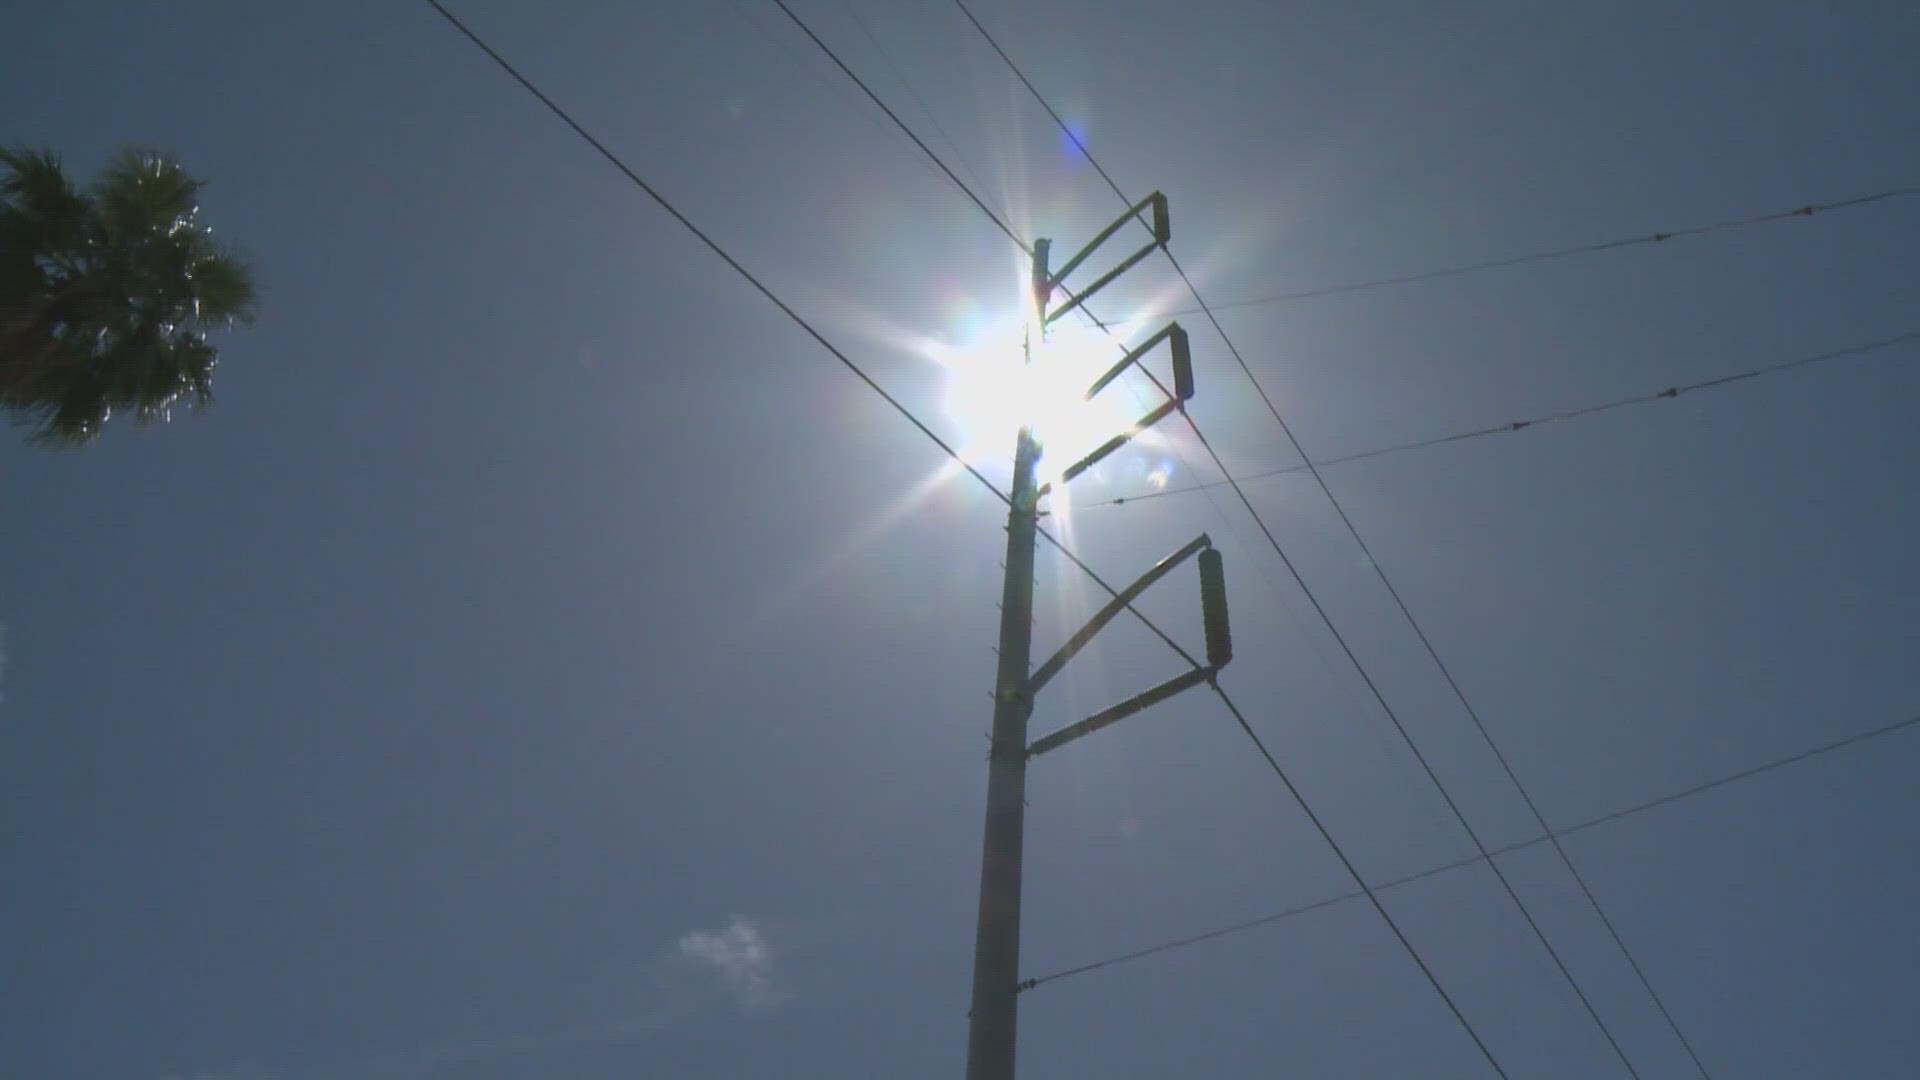 A new report sheds light on what could happen if the power was turned off for days during a heatwave.